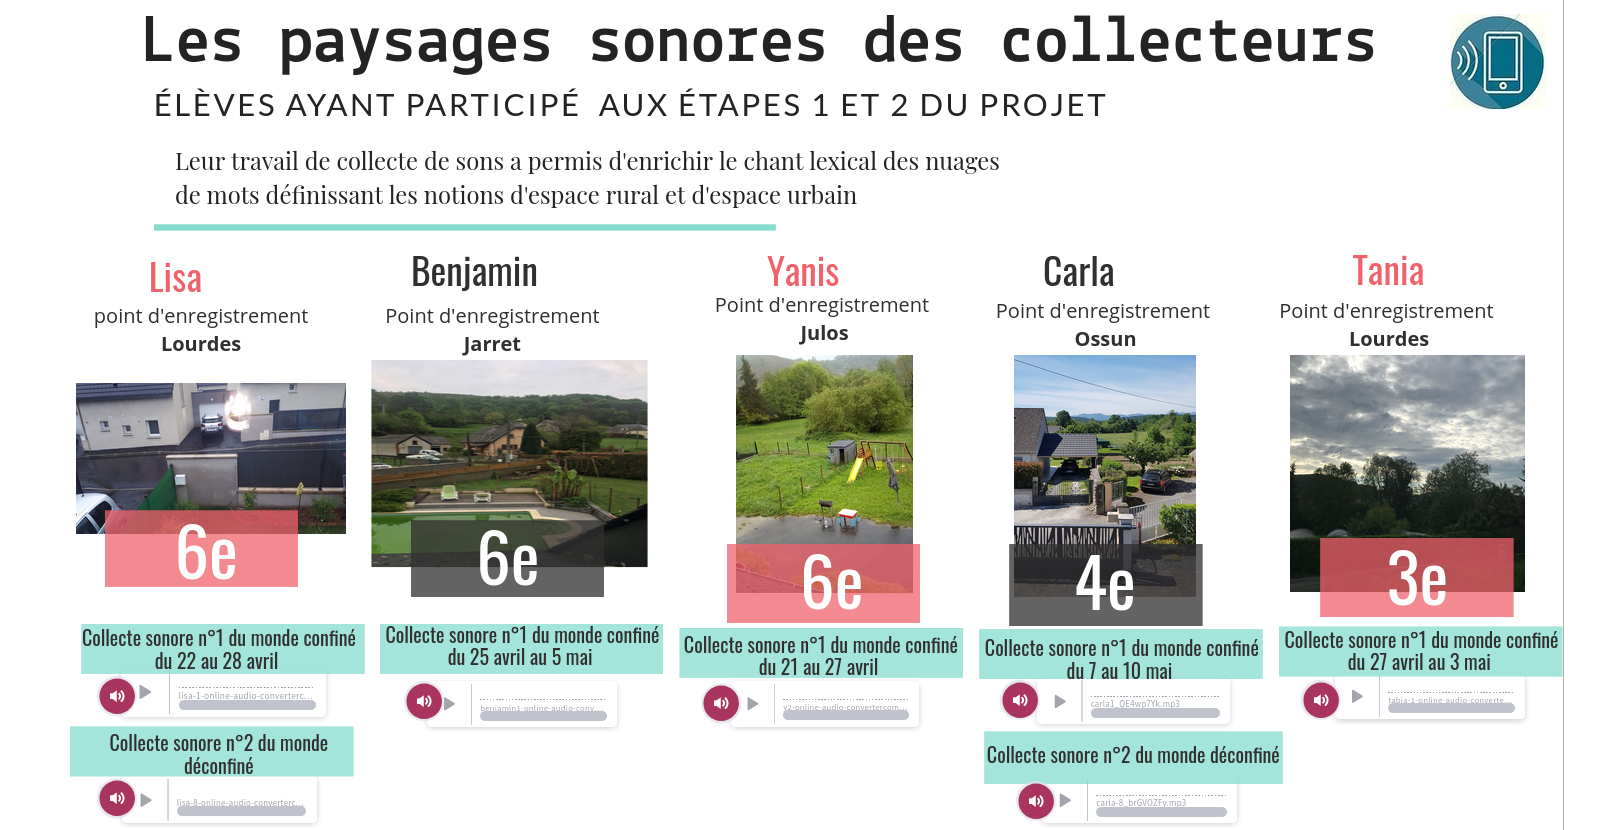  genialy paysages sonores lourdes1.png 